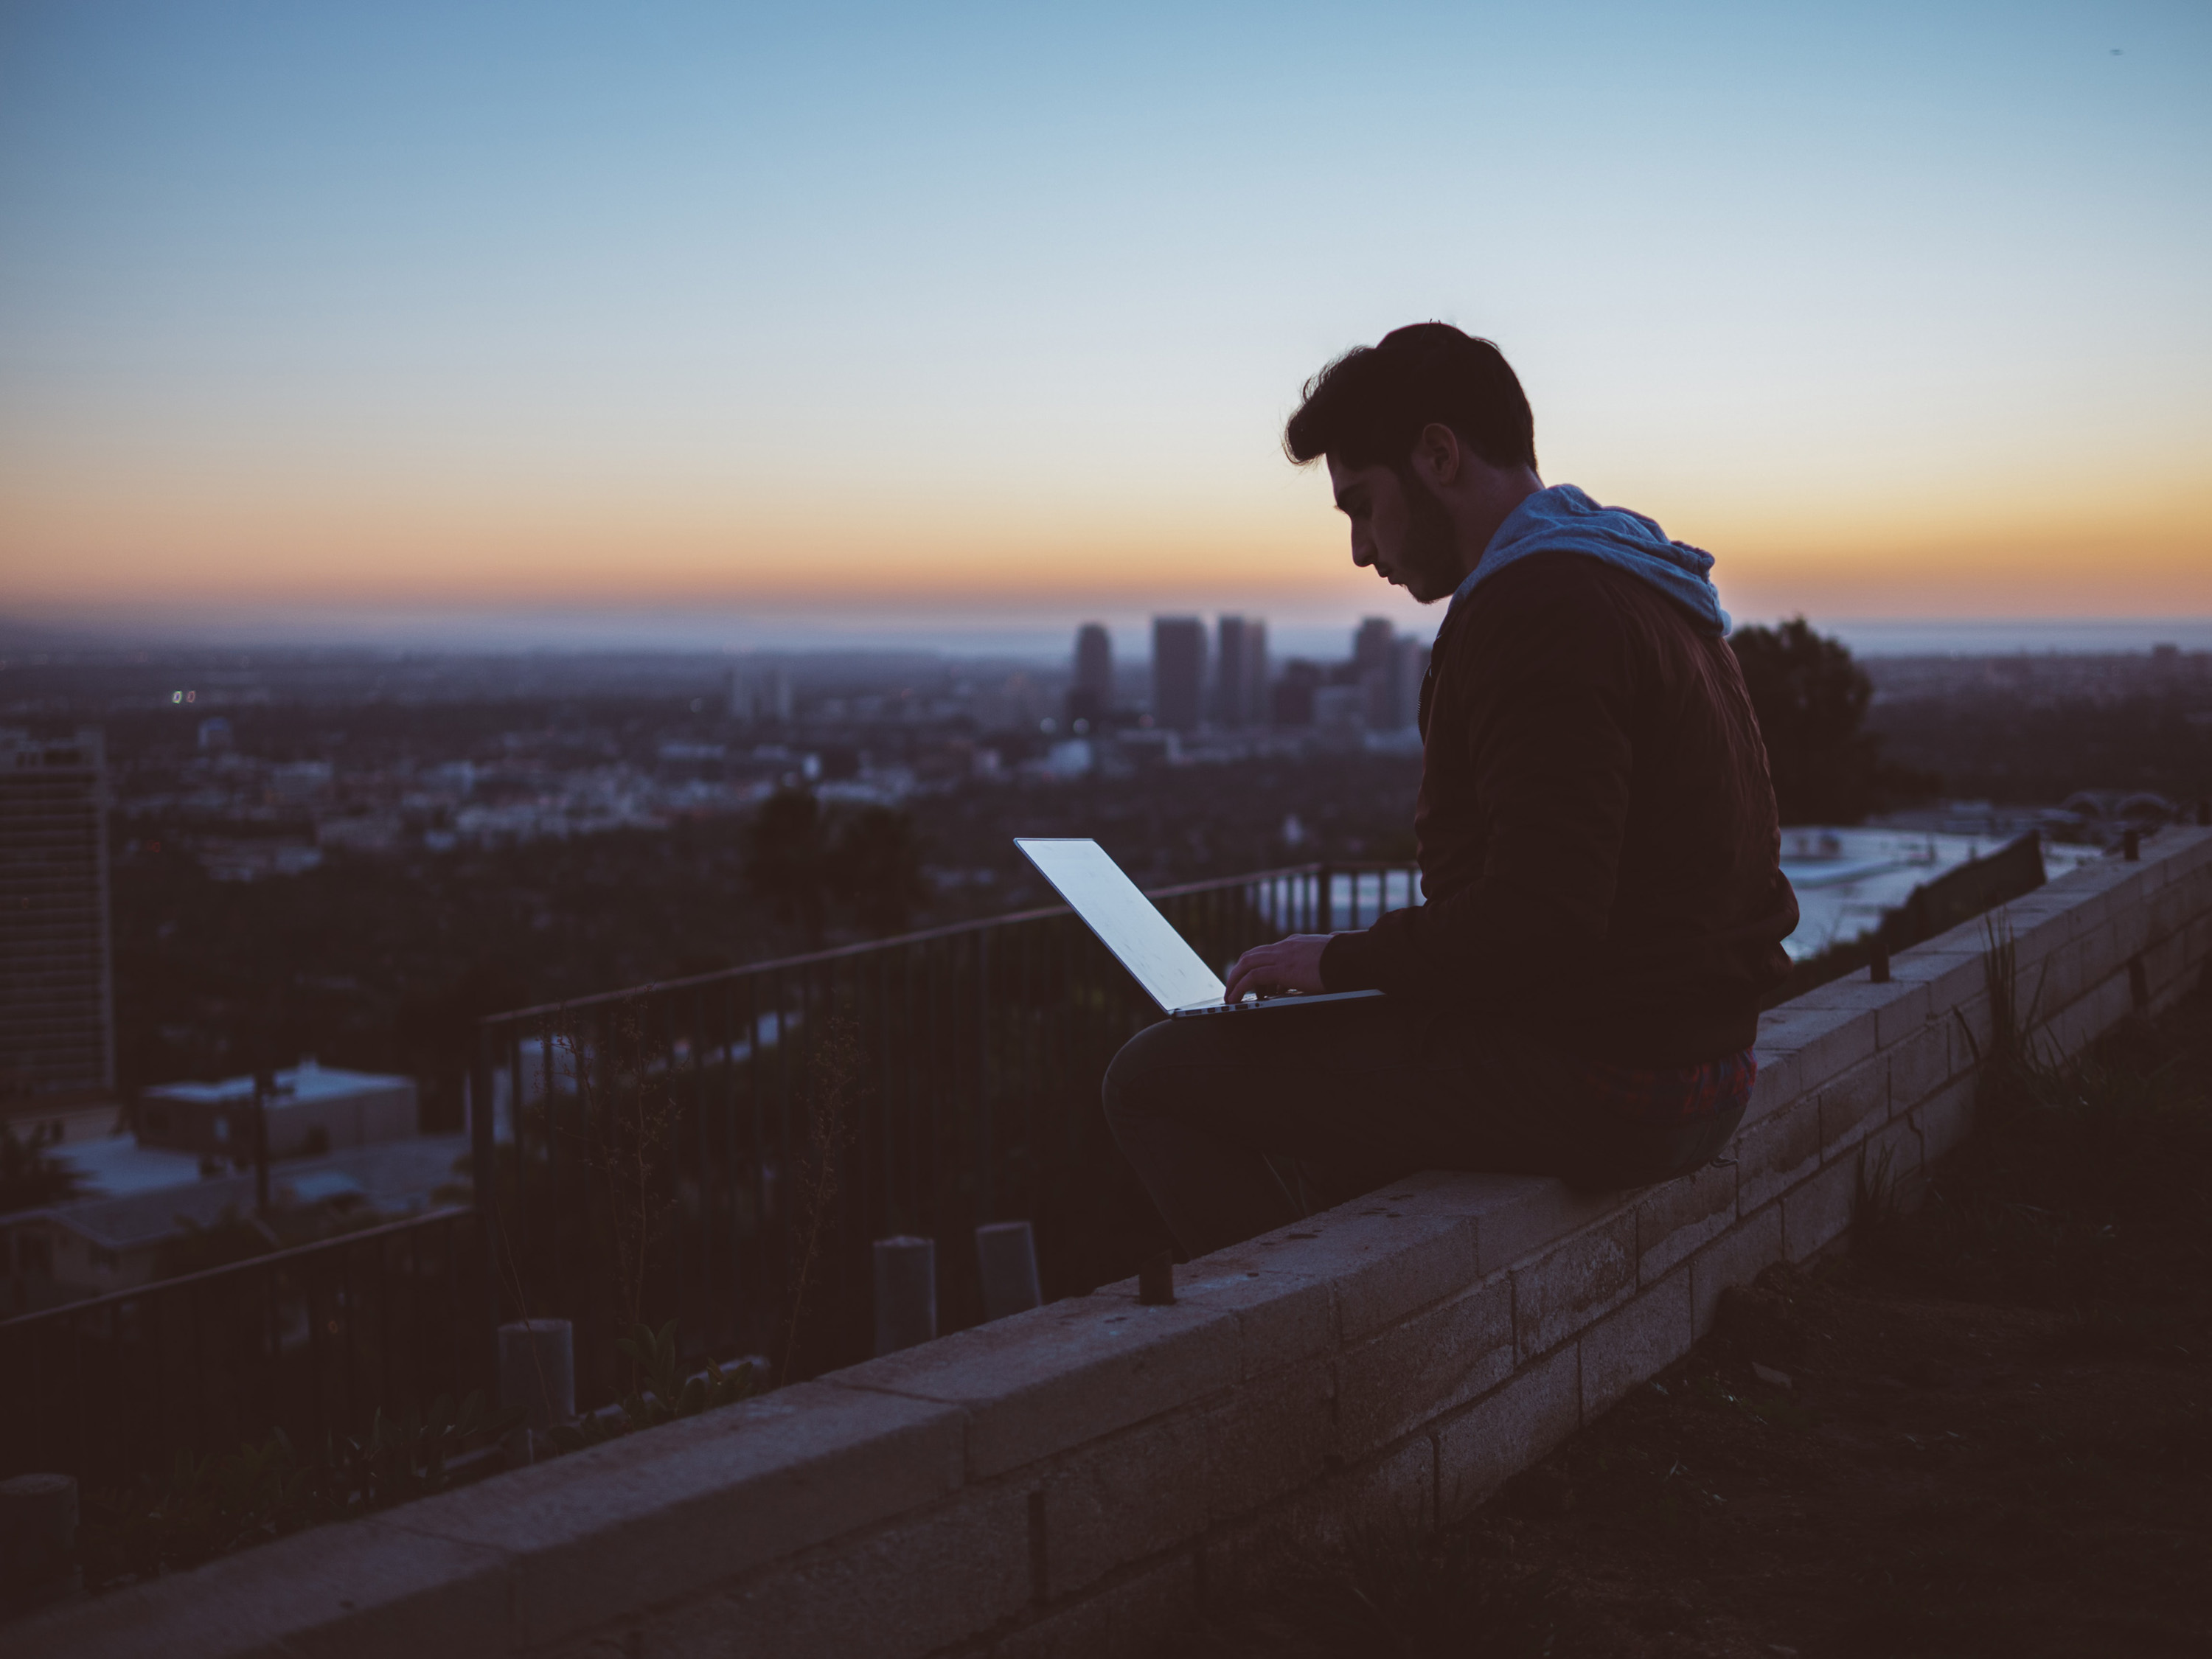 A person is silhouetted against a sunset, sitting on a ledge, working on a laptop with the cityscape in the background.